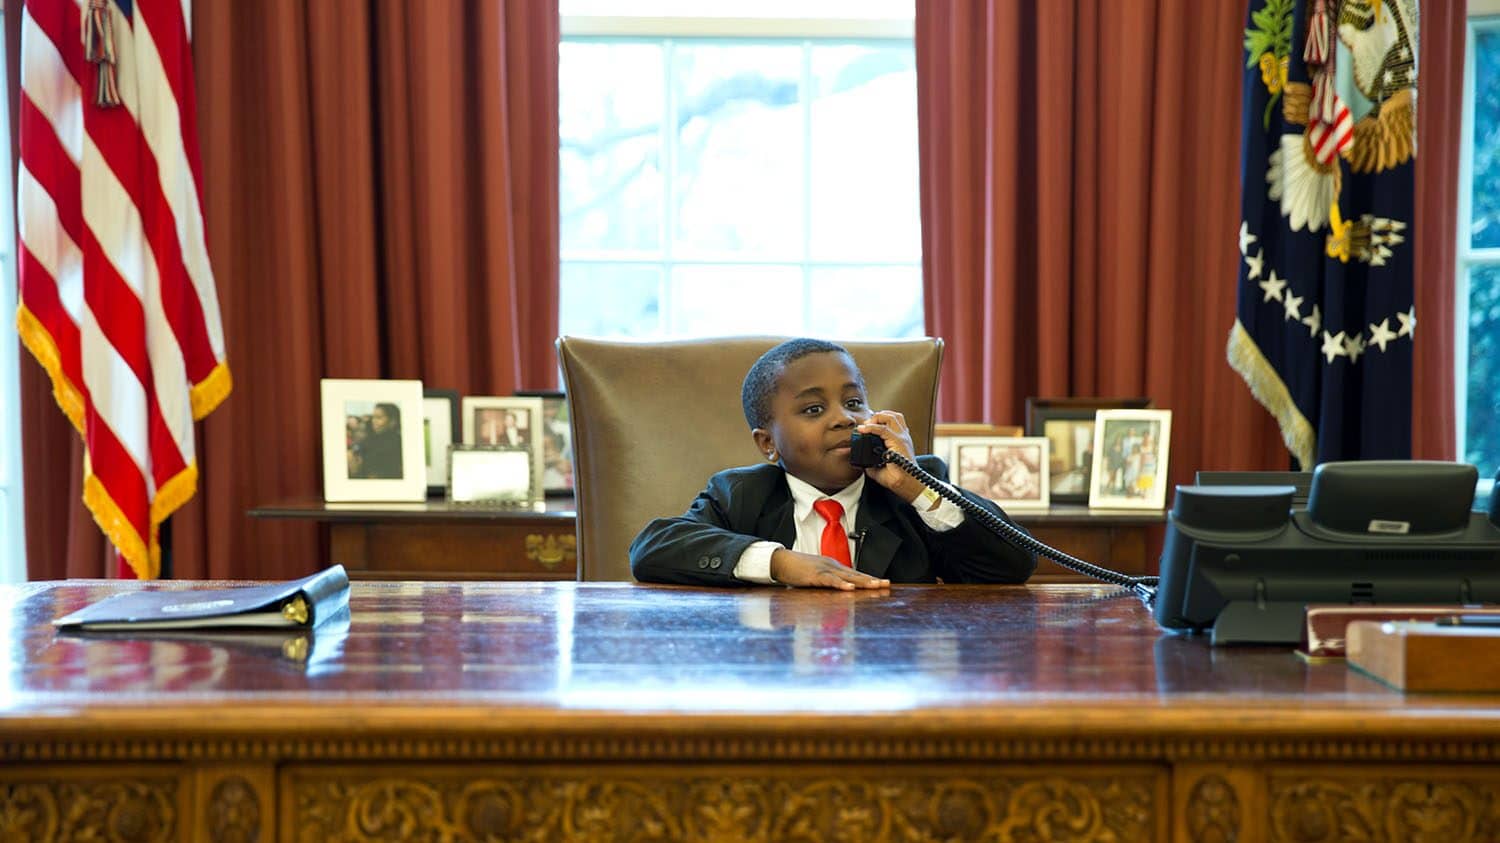 Image: A young Kid President sitting behind the desk in the Oval office.